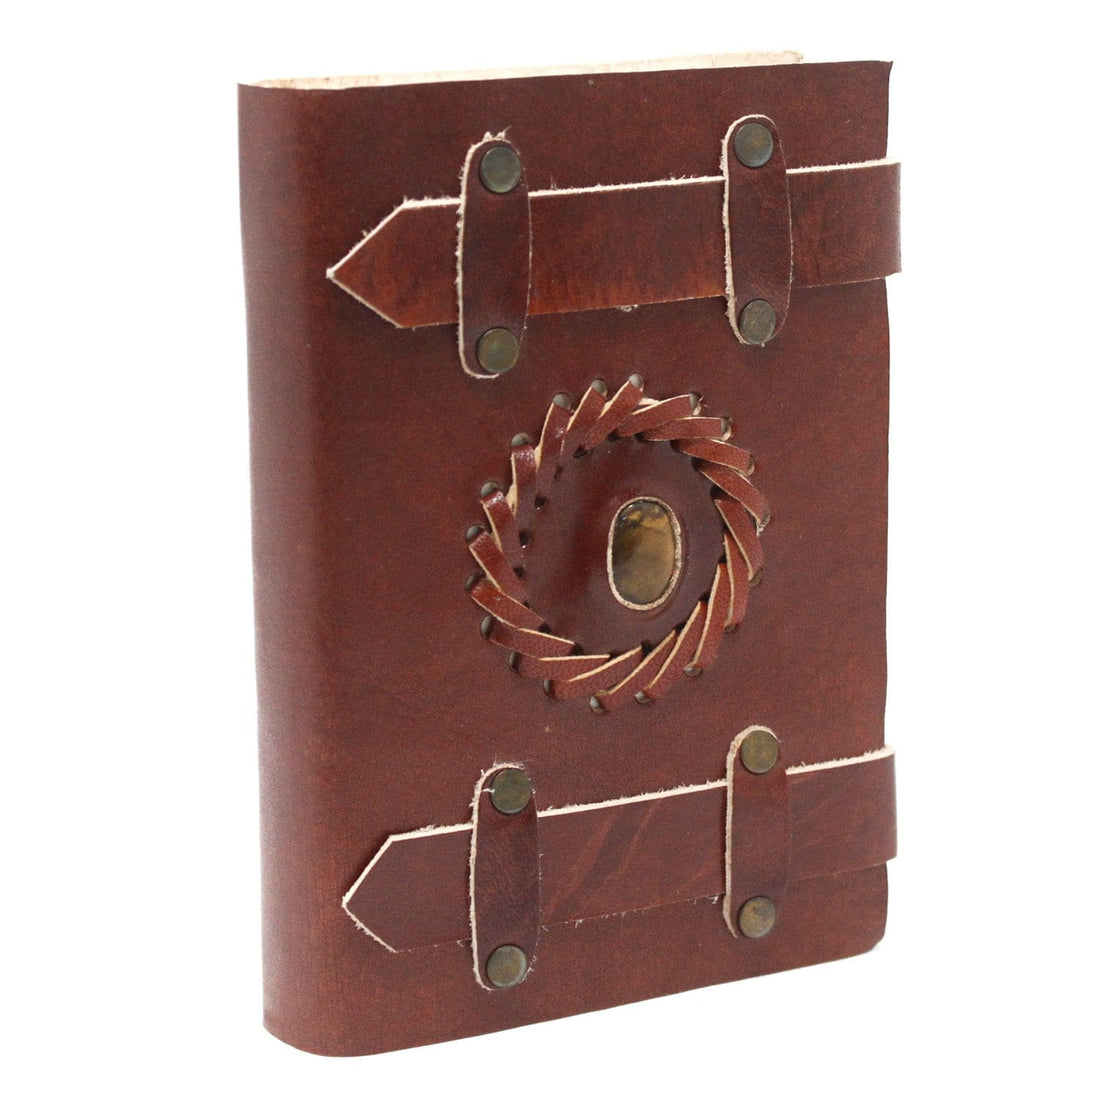 Leather Tigereye with Belts Notebook 15x10 cm - best price from Maltashopper.com LBN-17